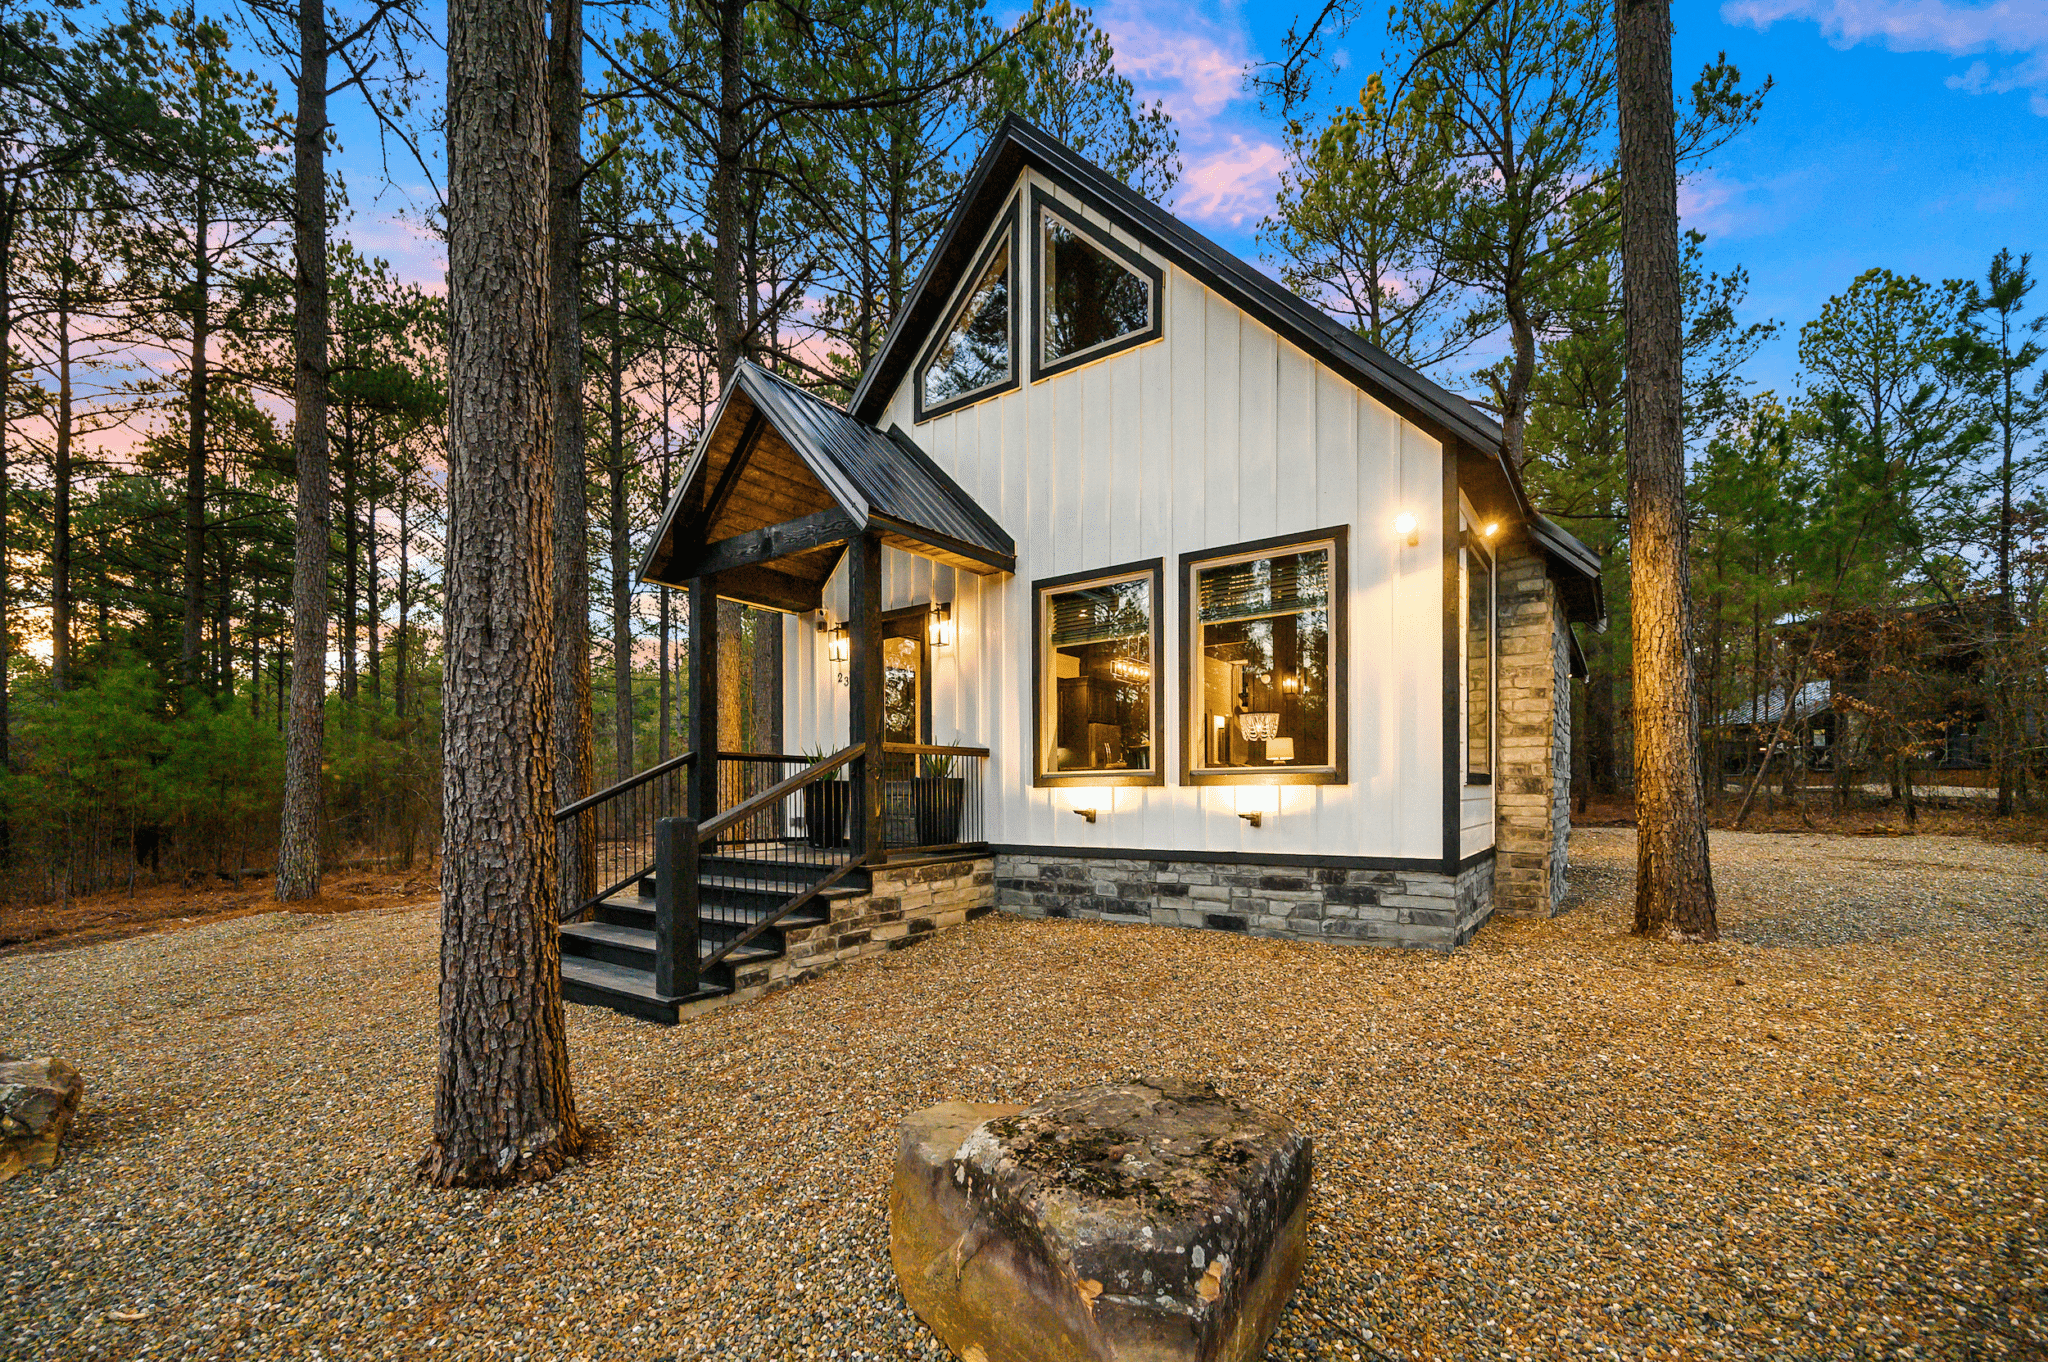 Discover one of our Broken Bow Cabins For Rent Gypsy Tea Room, a white and black cabin set among towering pine trees at sunset.